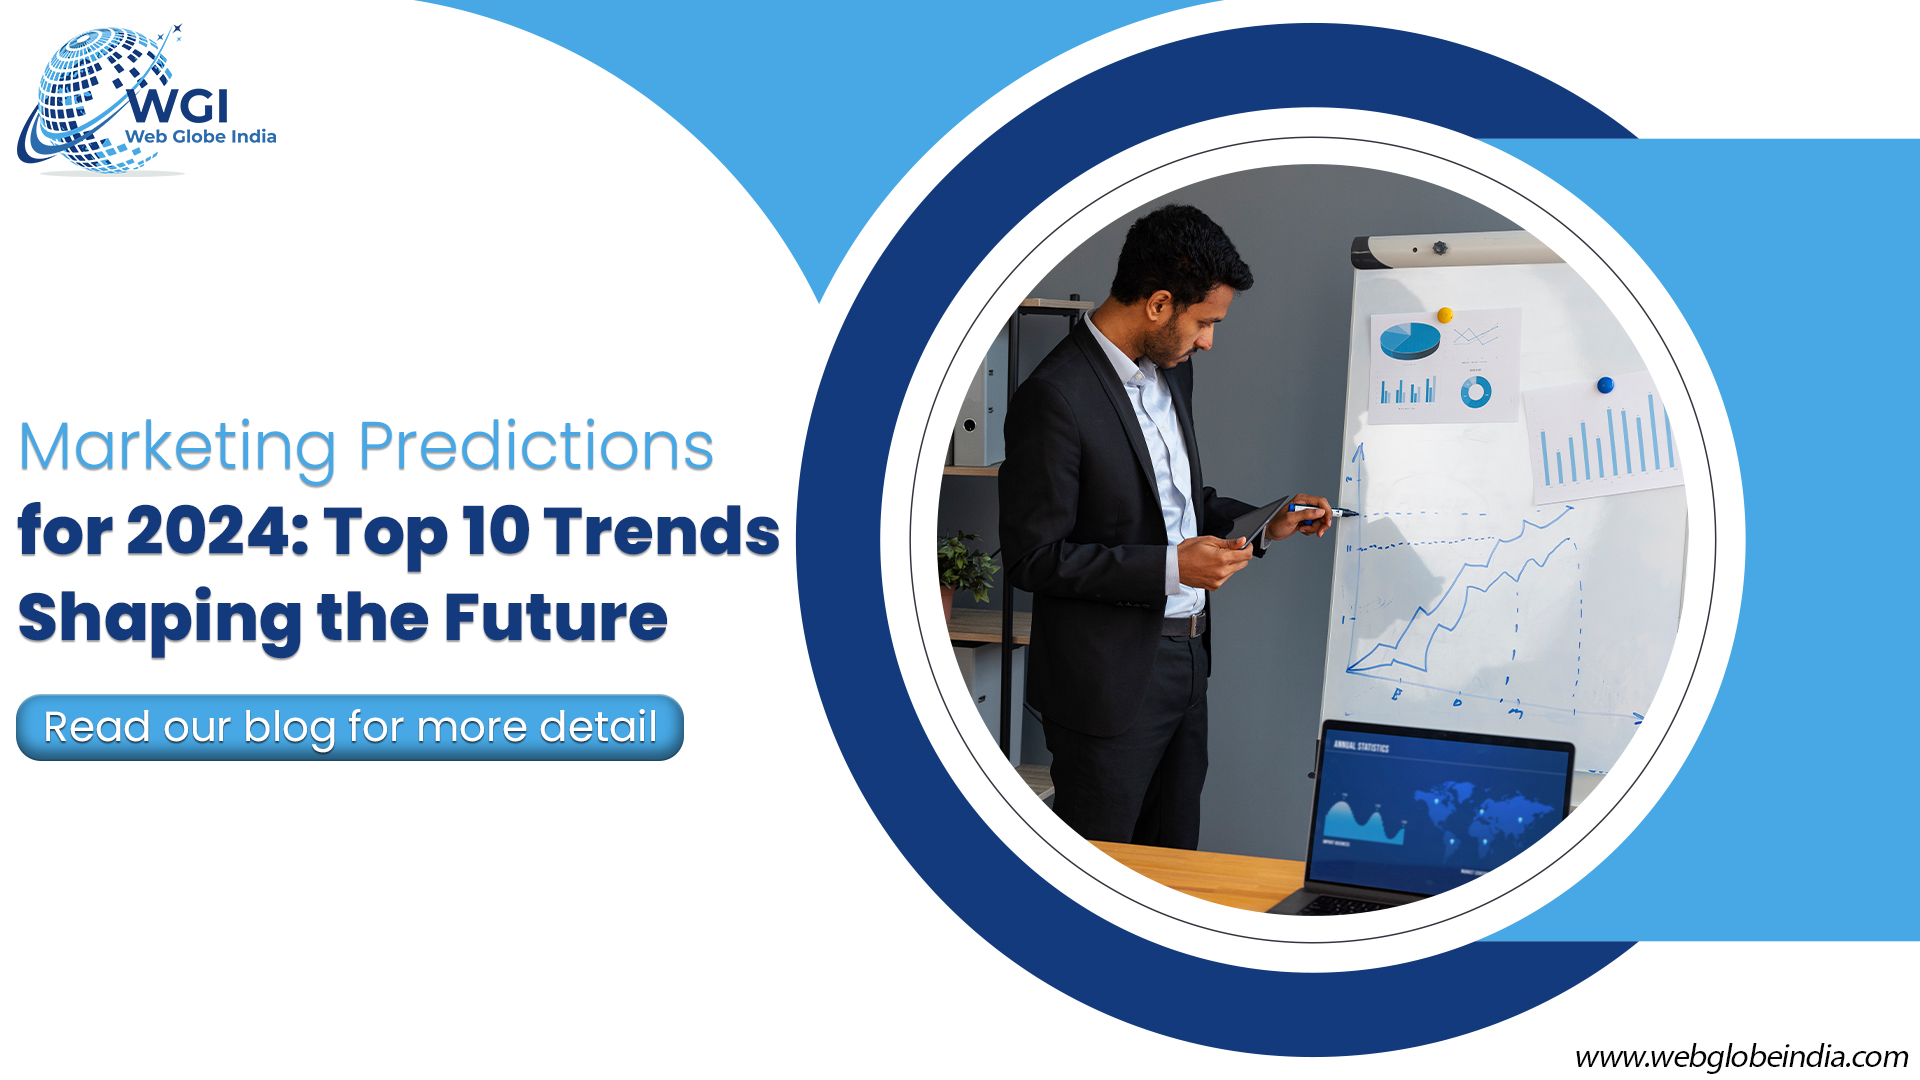 Marketing Predictions for 2024 : Top 10 Trends Shaping the Future